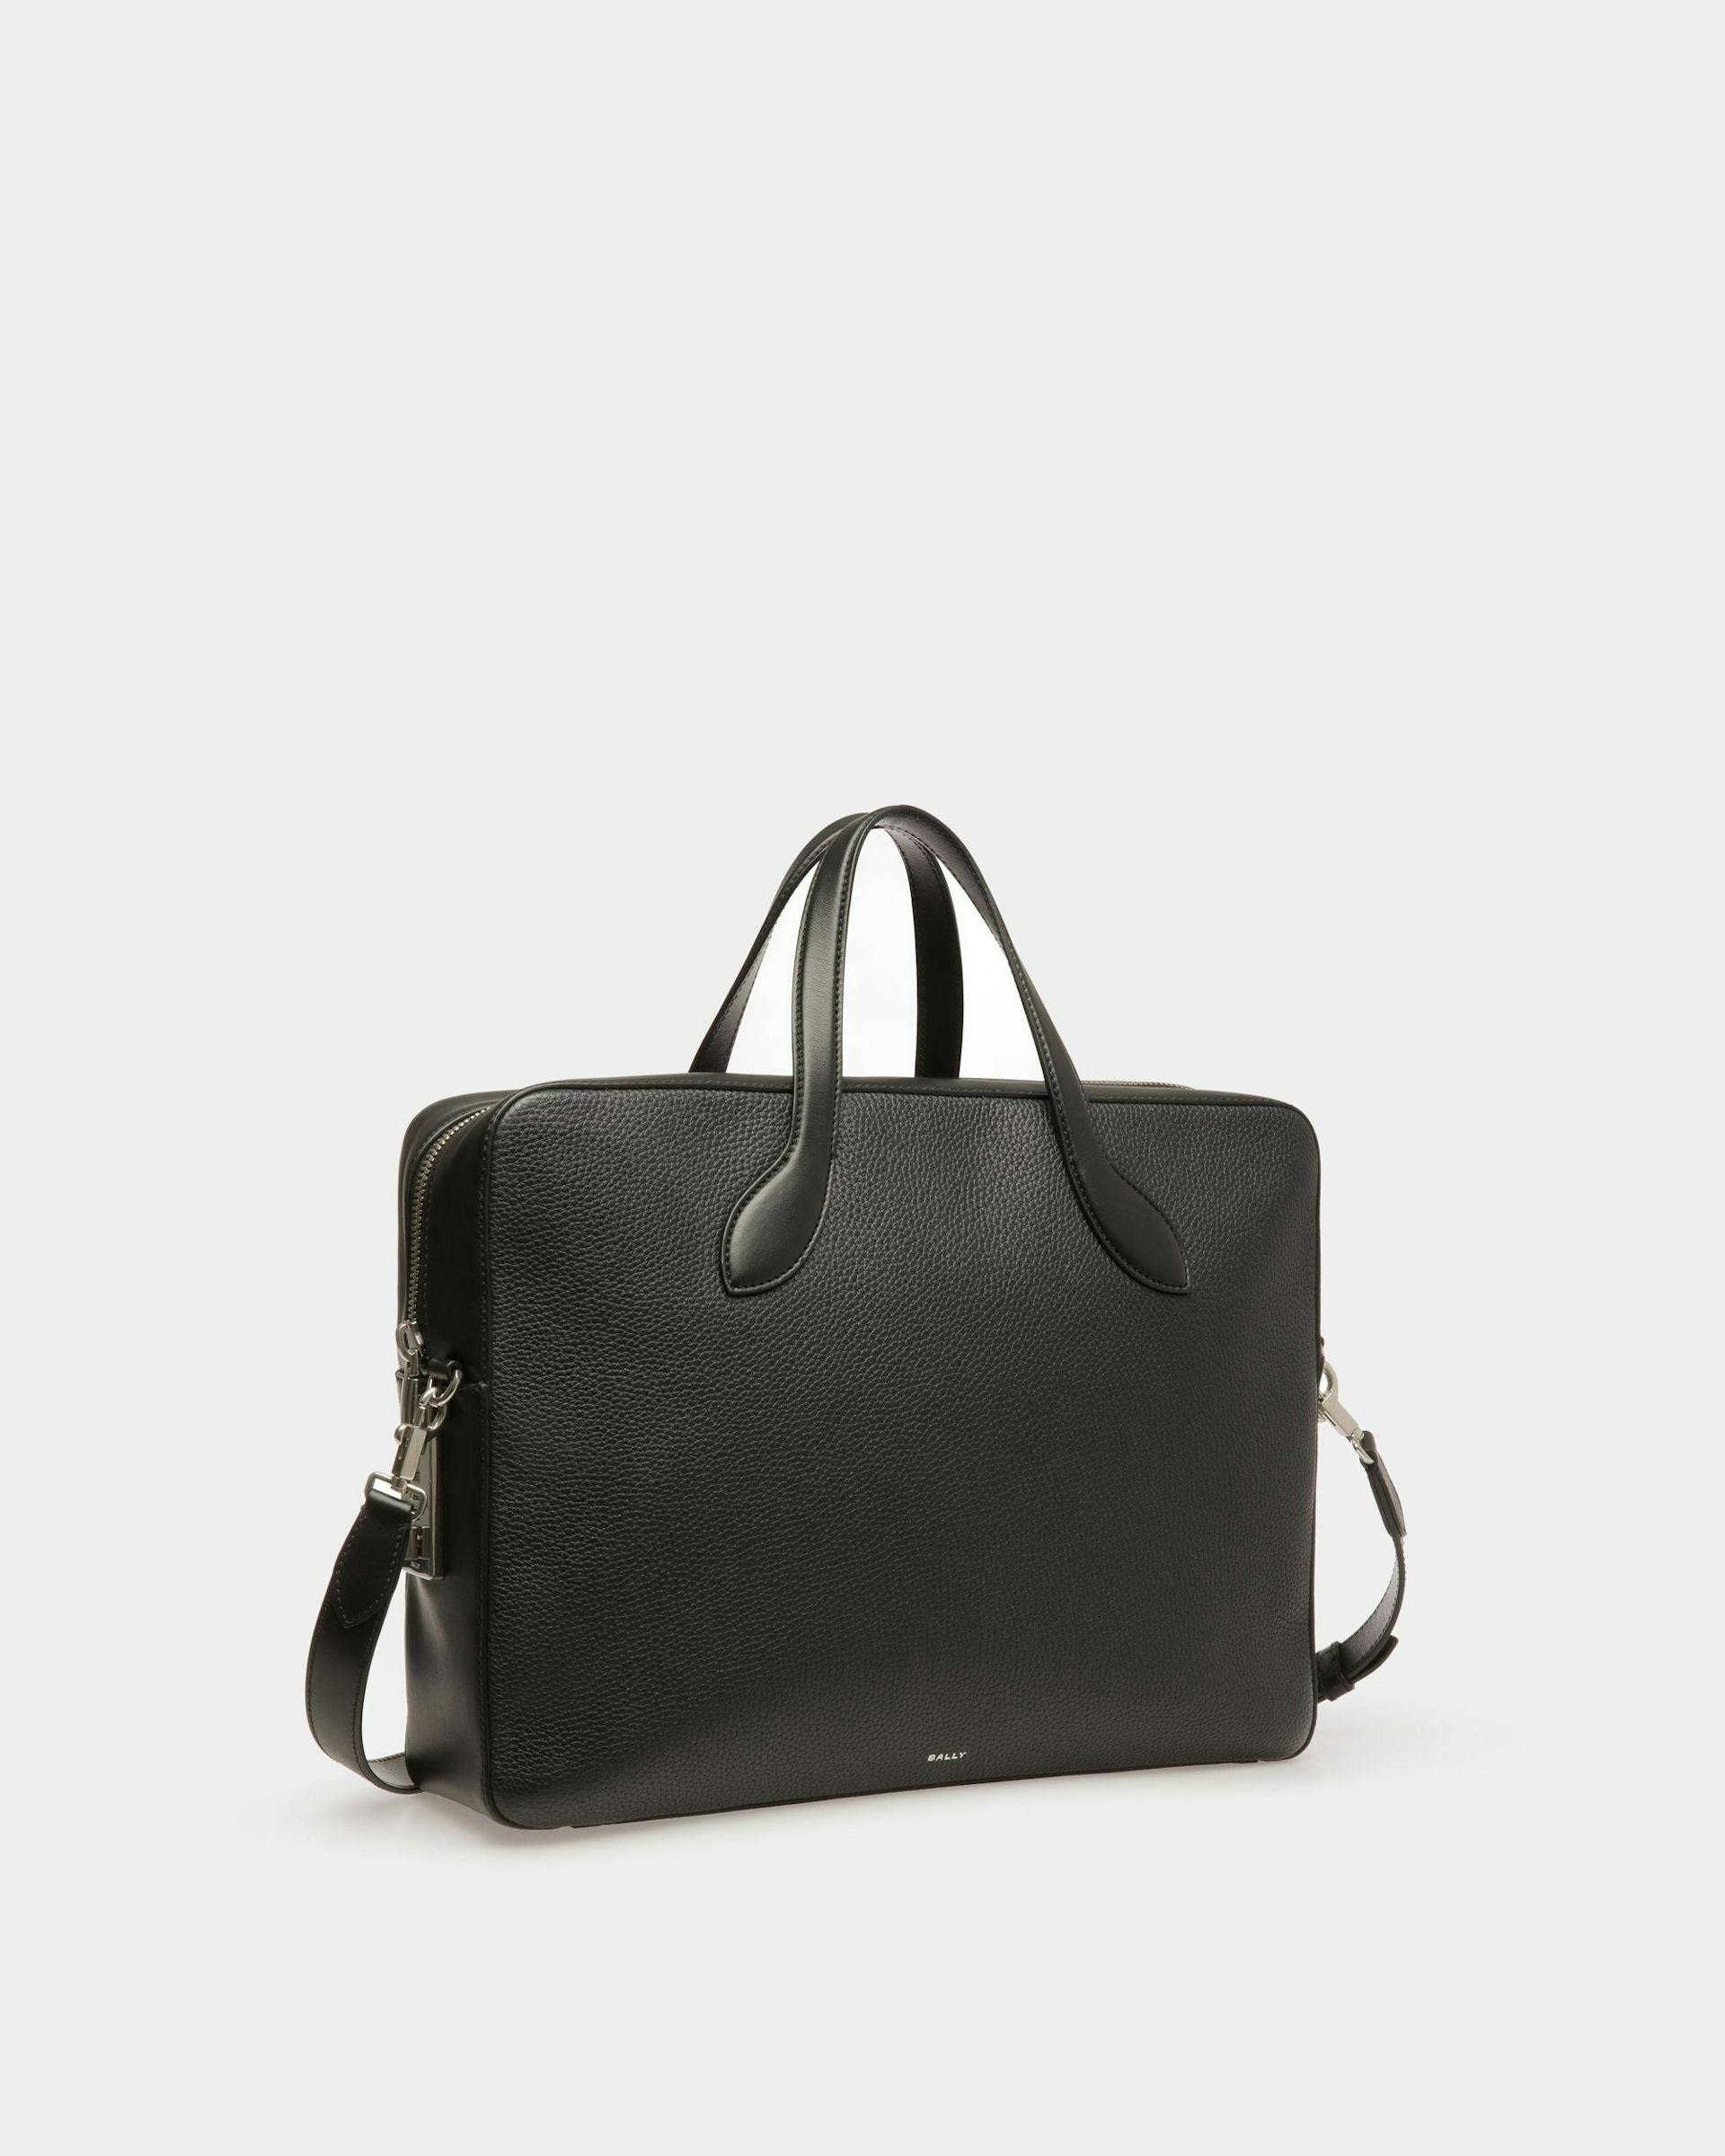 Men's Lago Briefcase In Black Leather | Bally | Still Life 3/4 Front